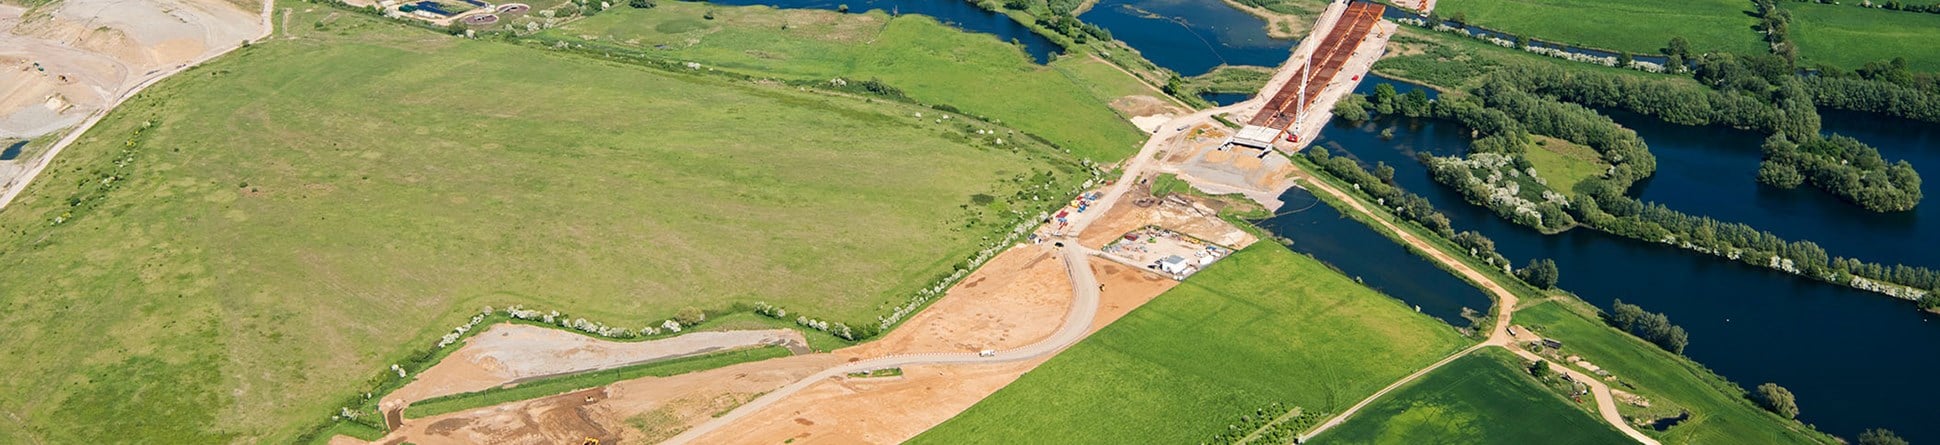 An aerial photograph showing archaeological excavations and surrounding countryside along the road improvement scheme for the A14 in Cambridgeshire, where it crosses over the Great Ouse river.